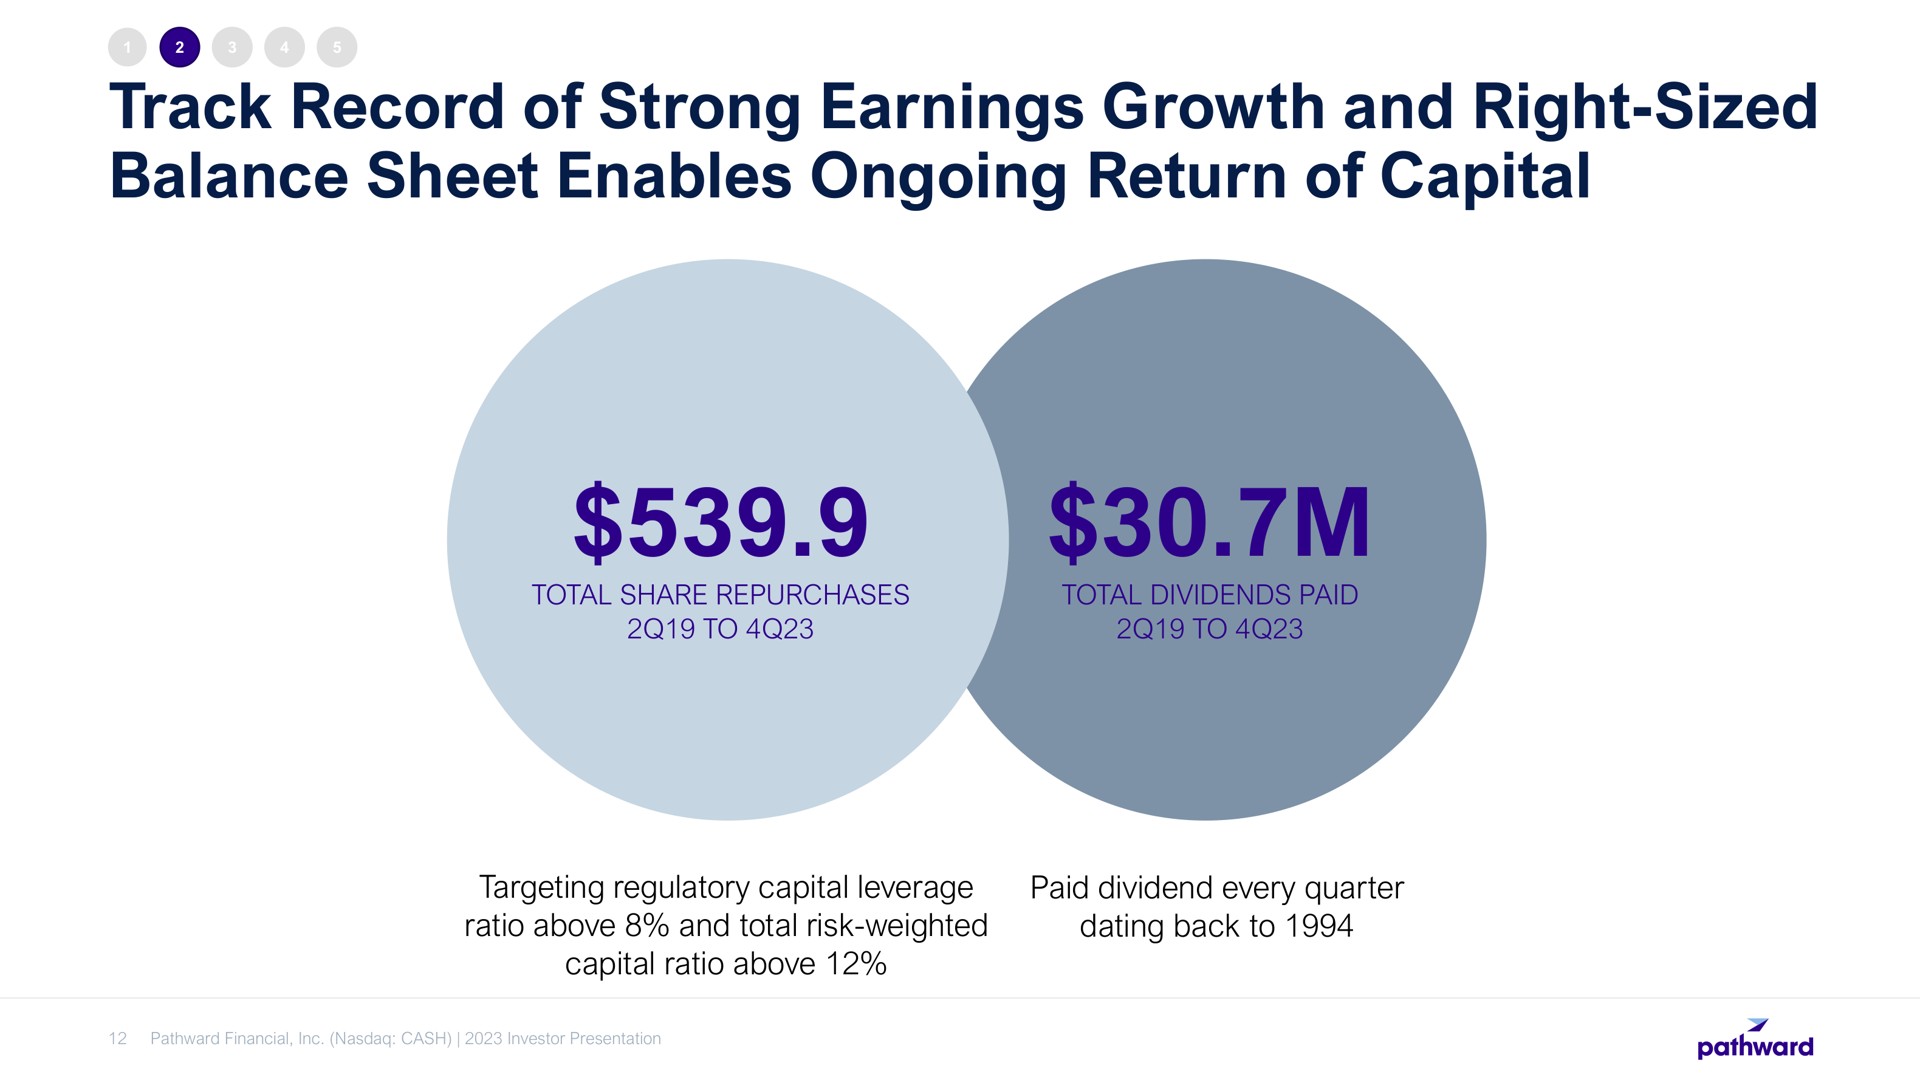 track record of strong earnings growth and right sized balance sheet enables ongoing return of capital | Pathward Financial